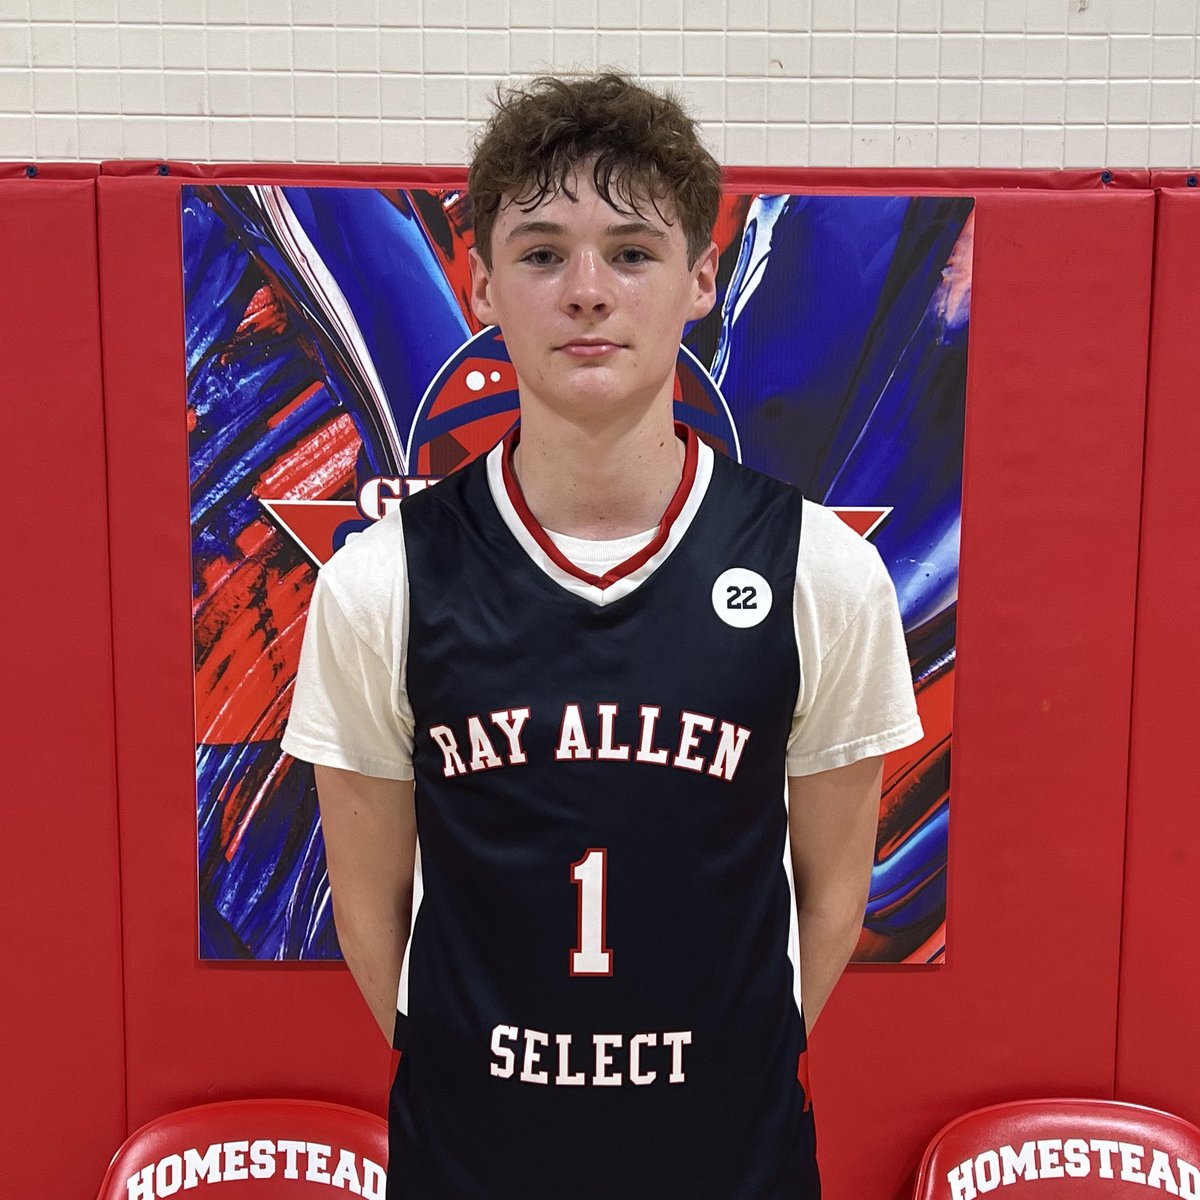 2028 Joey Kohnen of @RASMilwaukee impressed today at GenNext Invite. 6’3 guard is smooth and skilled, good size/length on the perimeter, and is a knockdown shooter. Prospect to track closely. @GNBABASKETBALL @ny2lasports